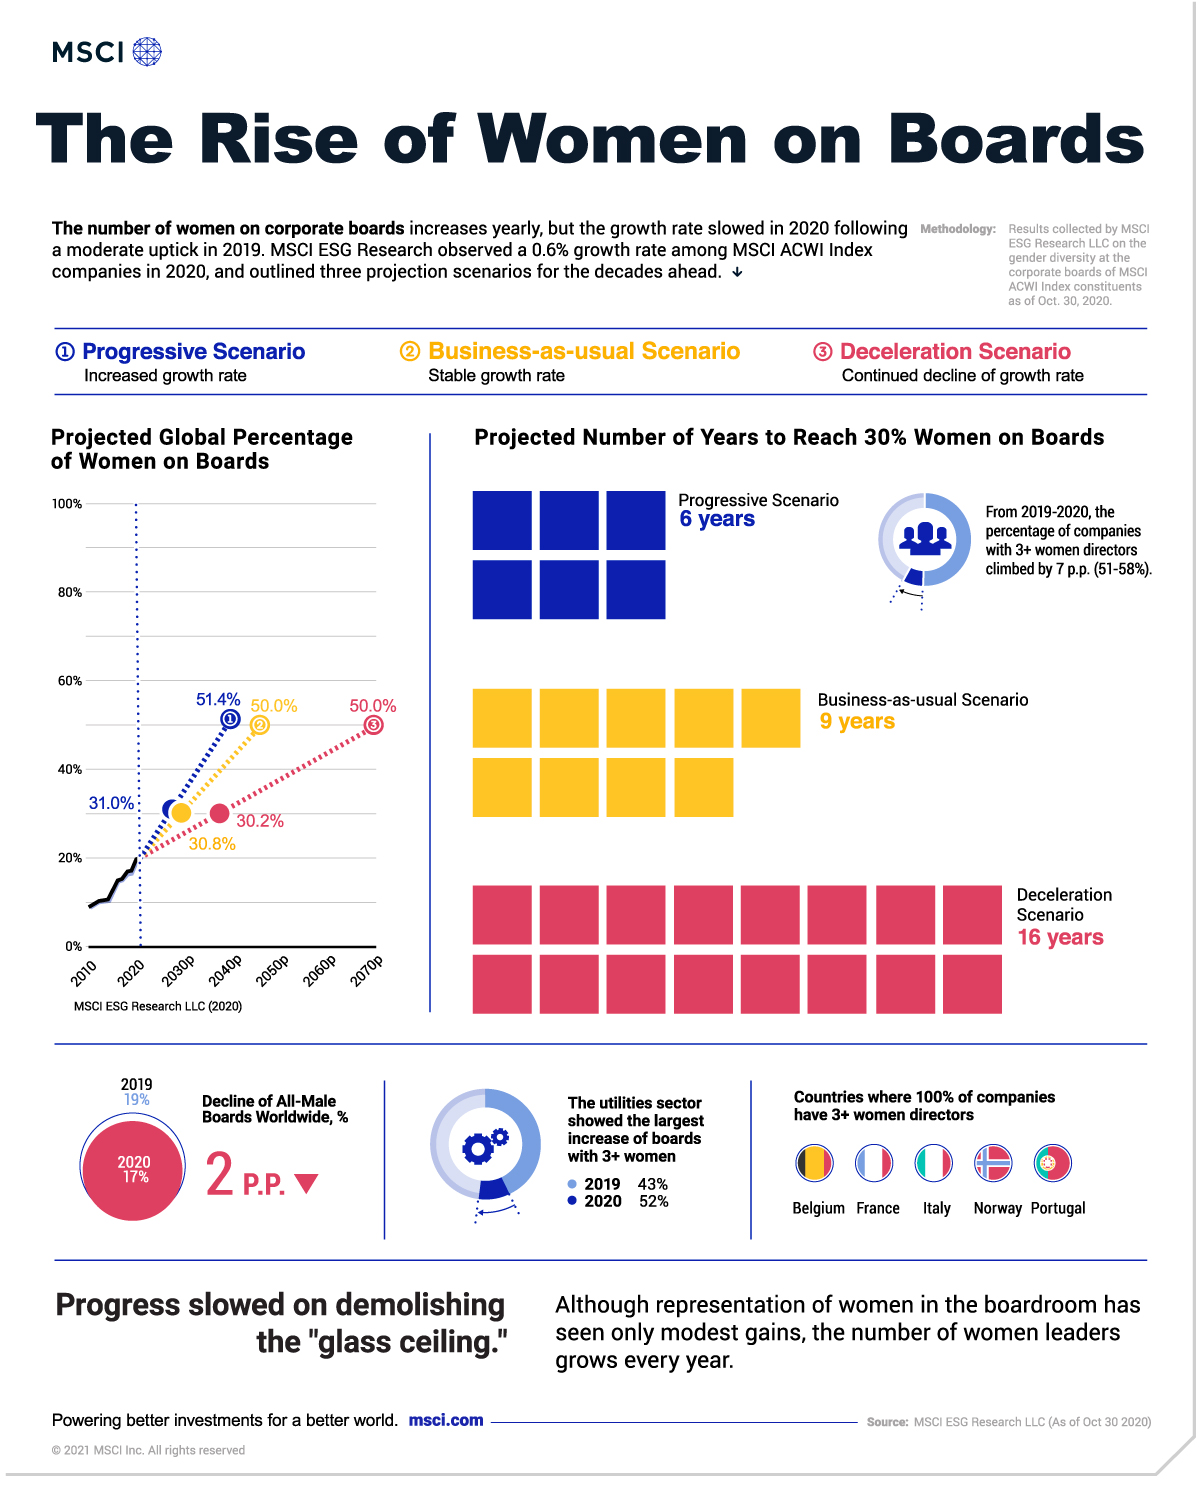 The Rise of Women on Boards